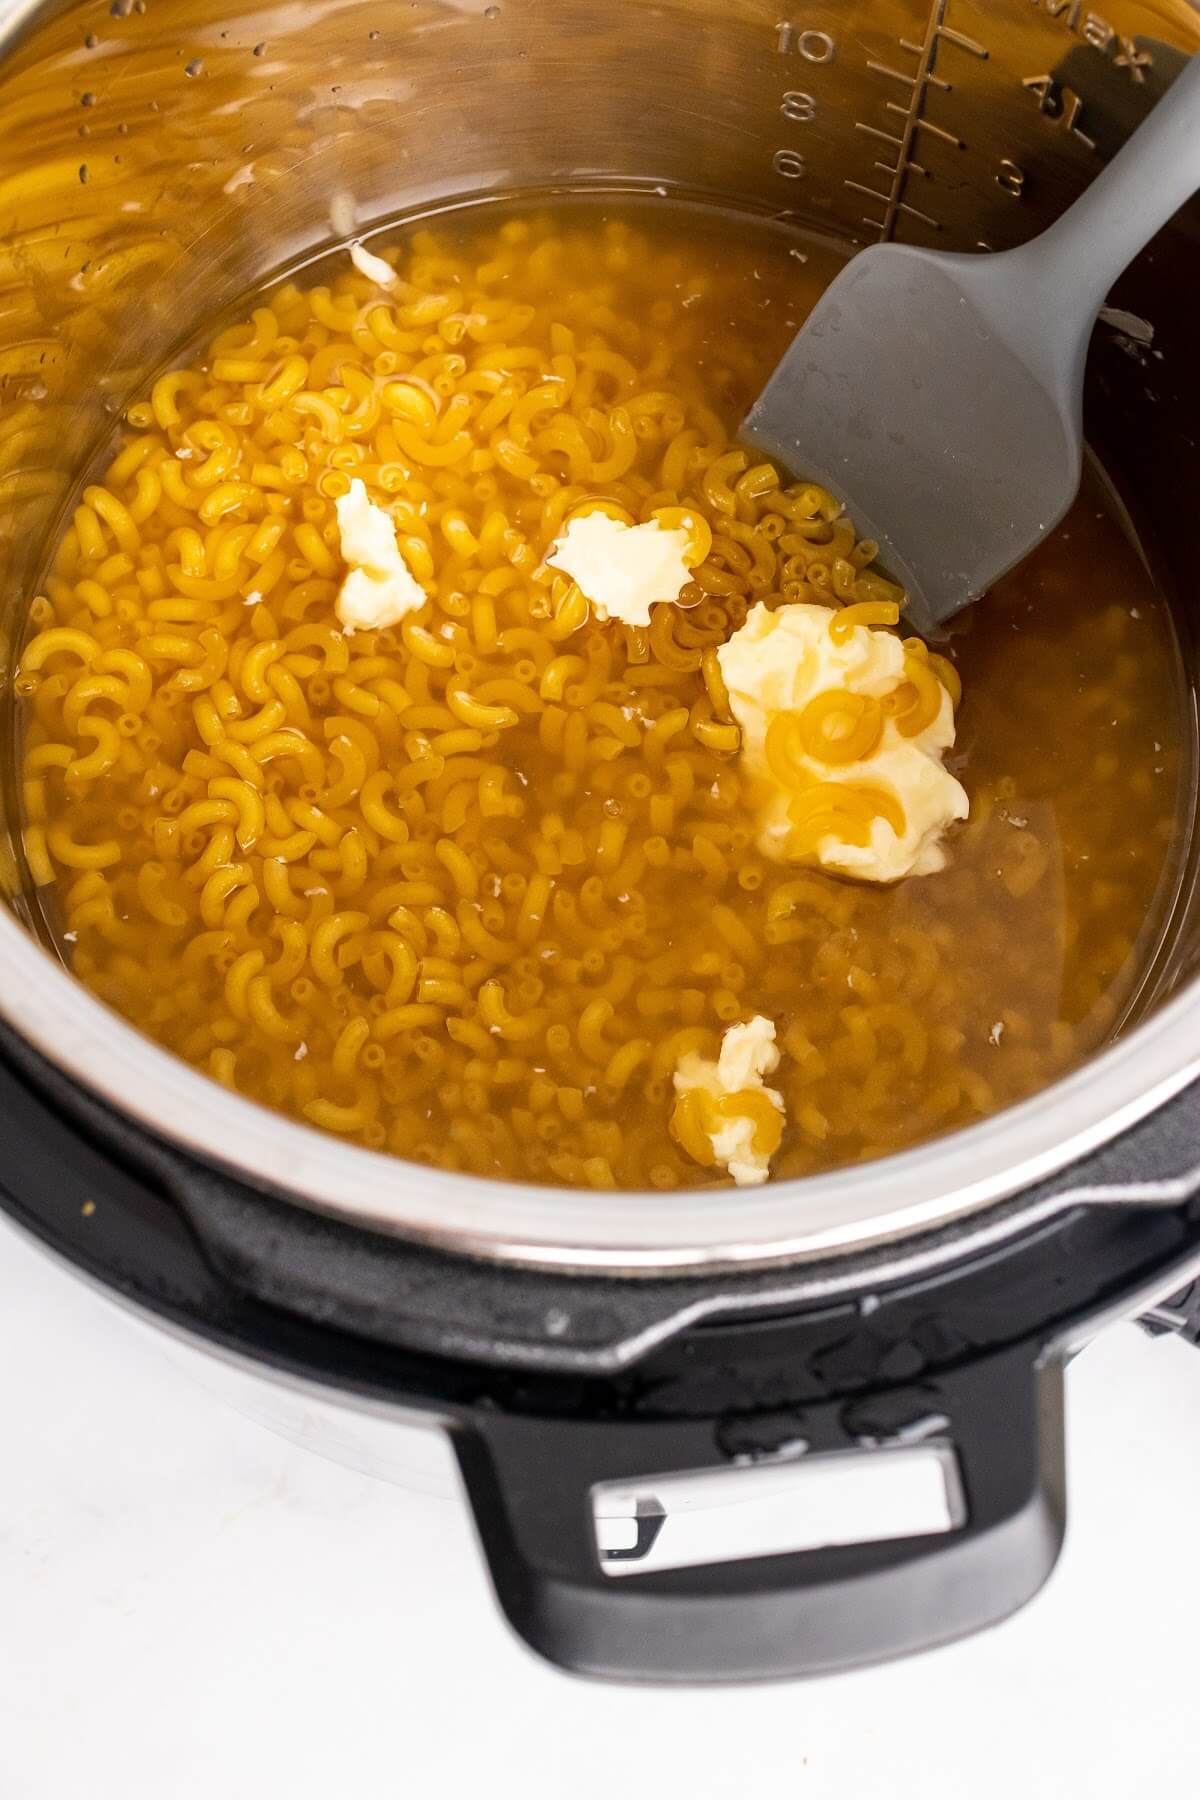 An Instant Pot filled with dry macaroni pasta, broth and butter being stirred with a spatula.